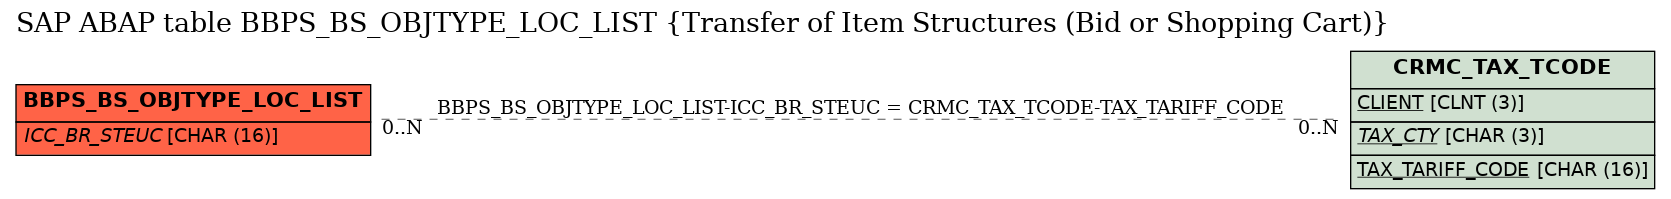 E-R Diagram for table BBPS_BS_OBJTYPE_LOC_LIST (Transfer of Item Structures (Bid or Shopping Cart))